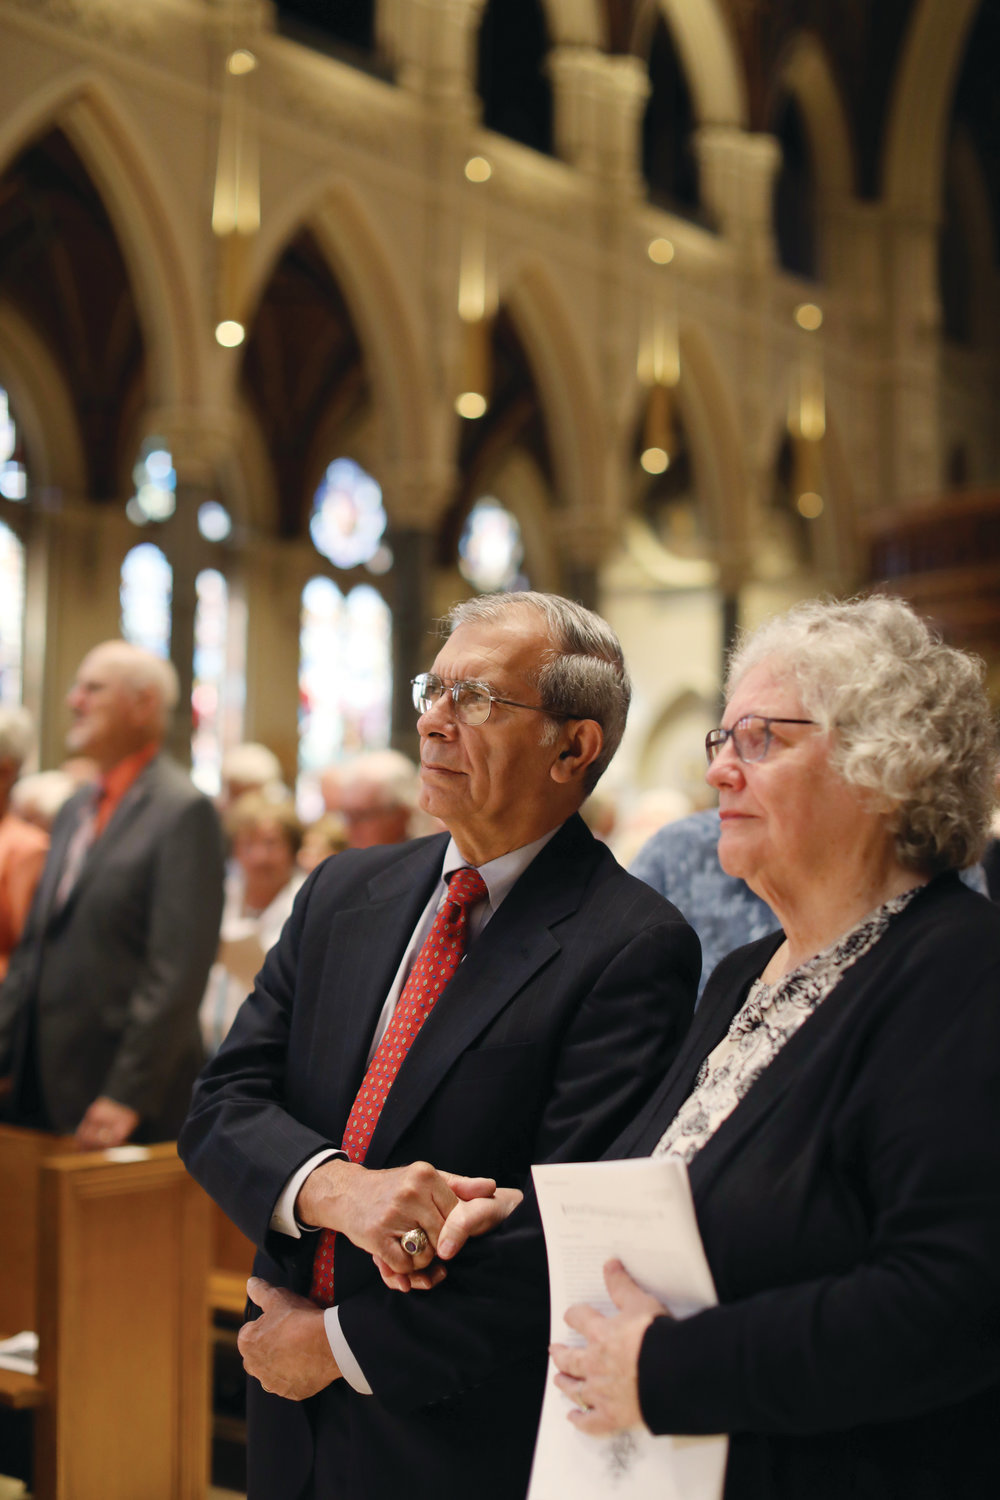 Hundreds of couples gathered this past September at the Cathedral of SS. Peter and Paul to renew their wedding vows.